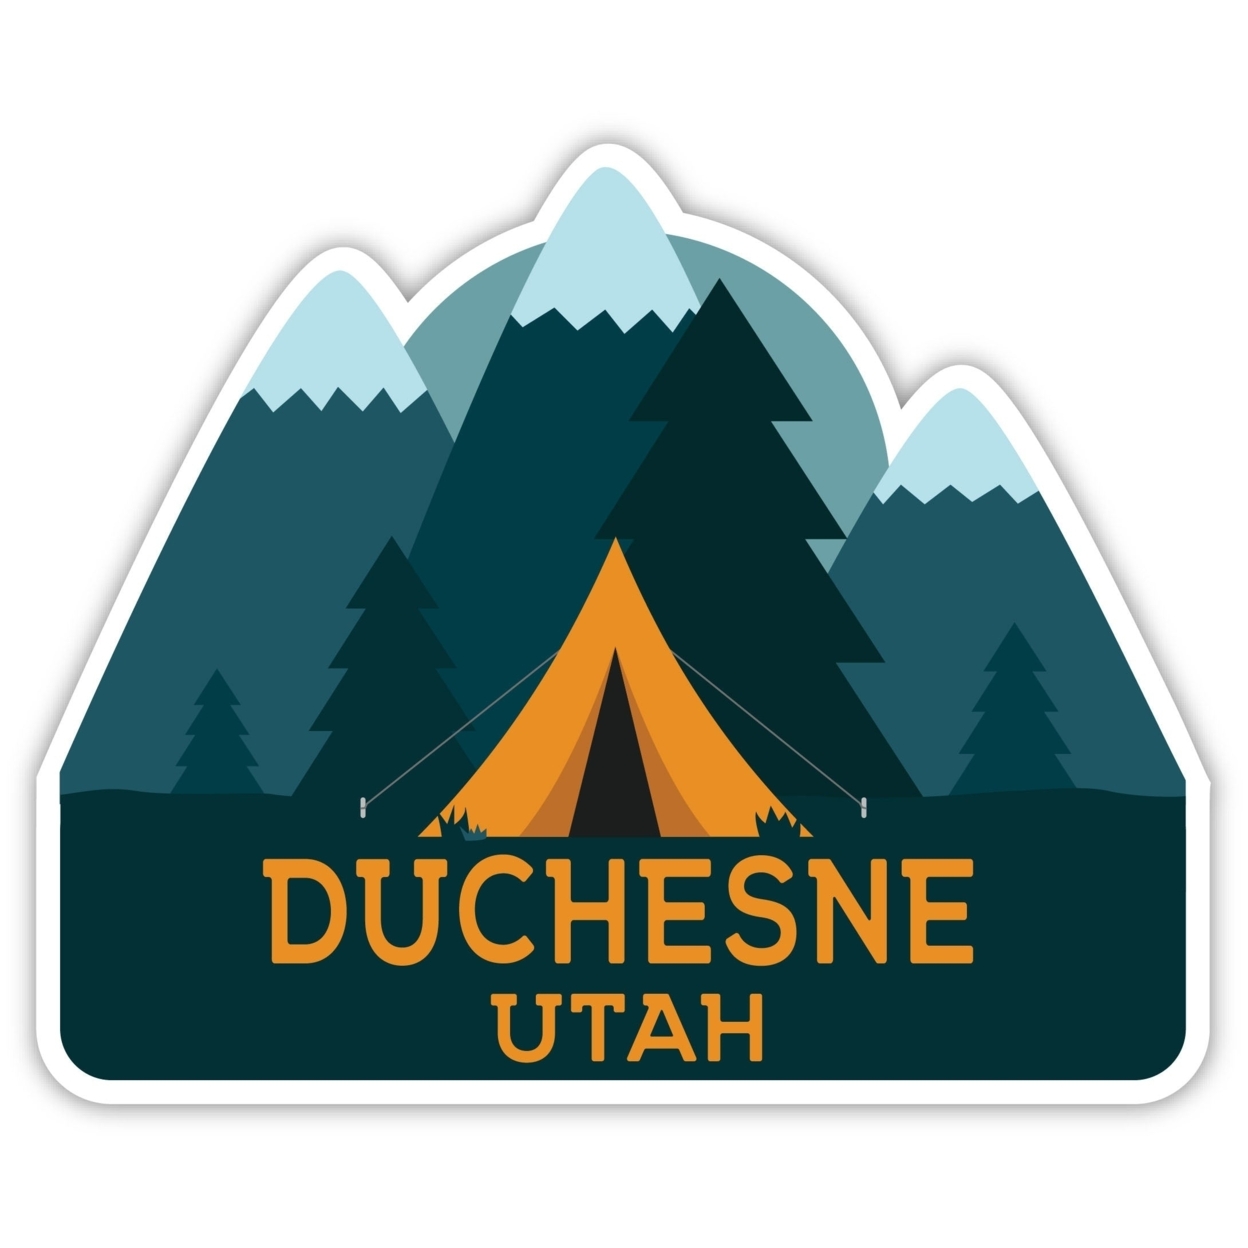 Duchesne Utah Souvenir Decorative Stickers (Choose Theme And Size) - 4-Pack, 8-Inch, Camp Life